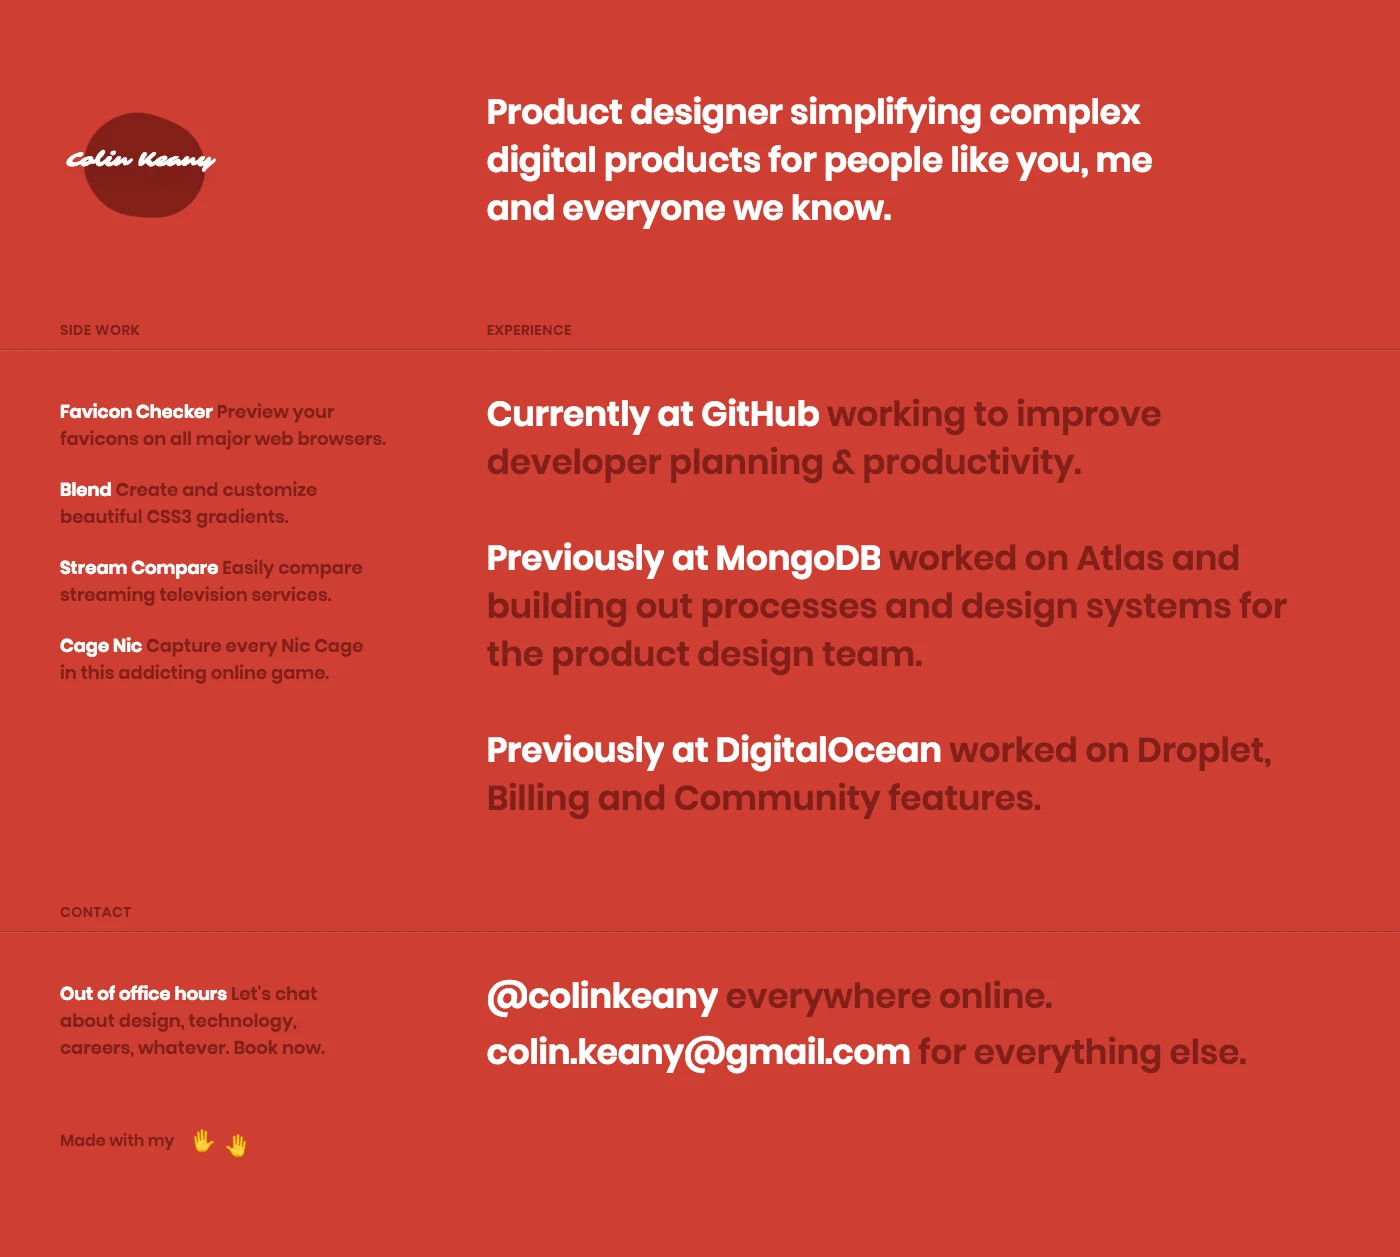 Colin Keany Landing Page Example: Product designer simplifying complex digital products for people like you, me and everyone we know.